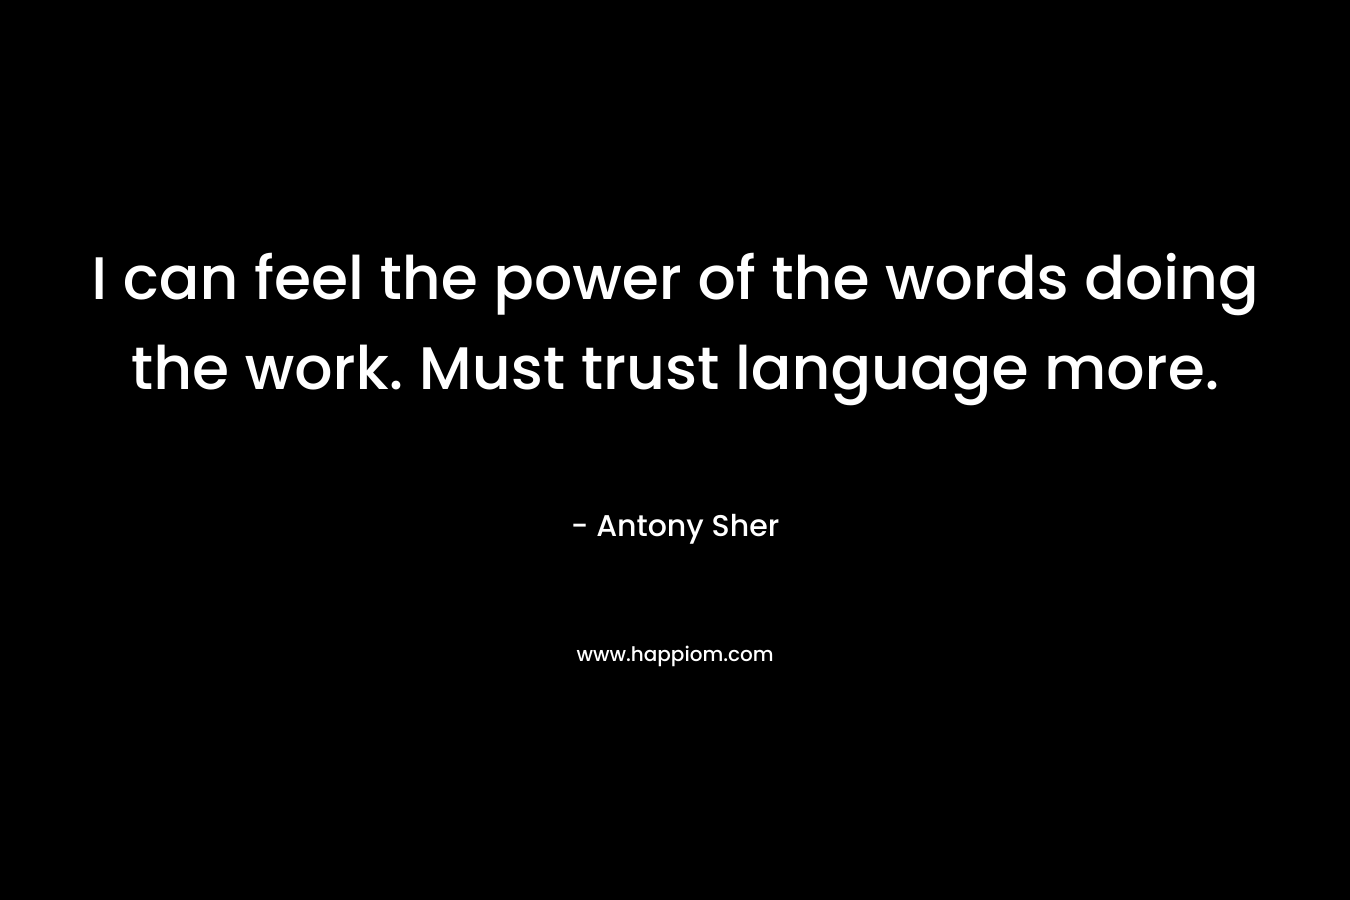 I can feel the power of the words doing the work. Must trust language more.